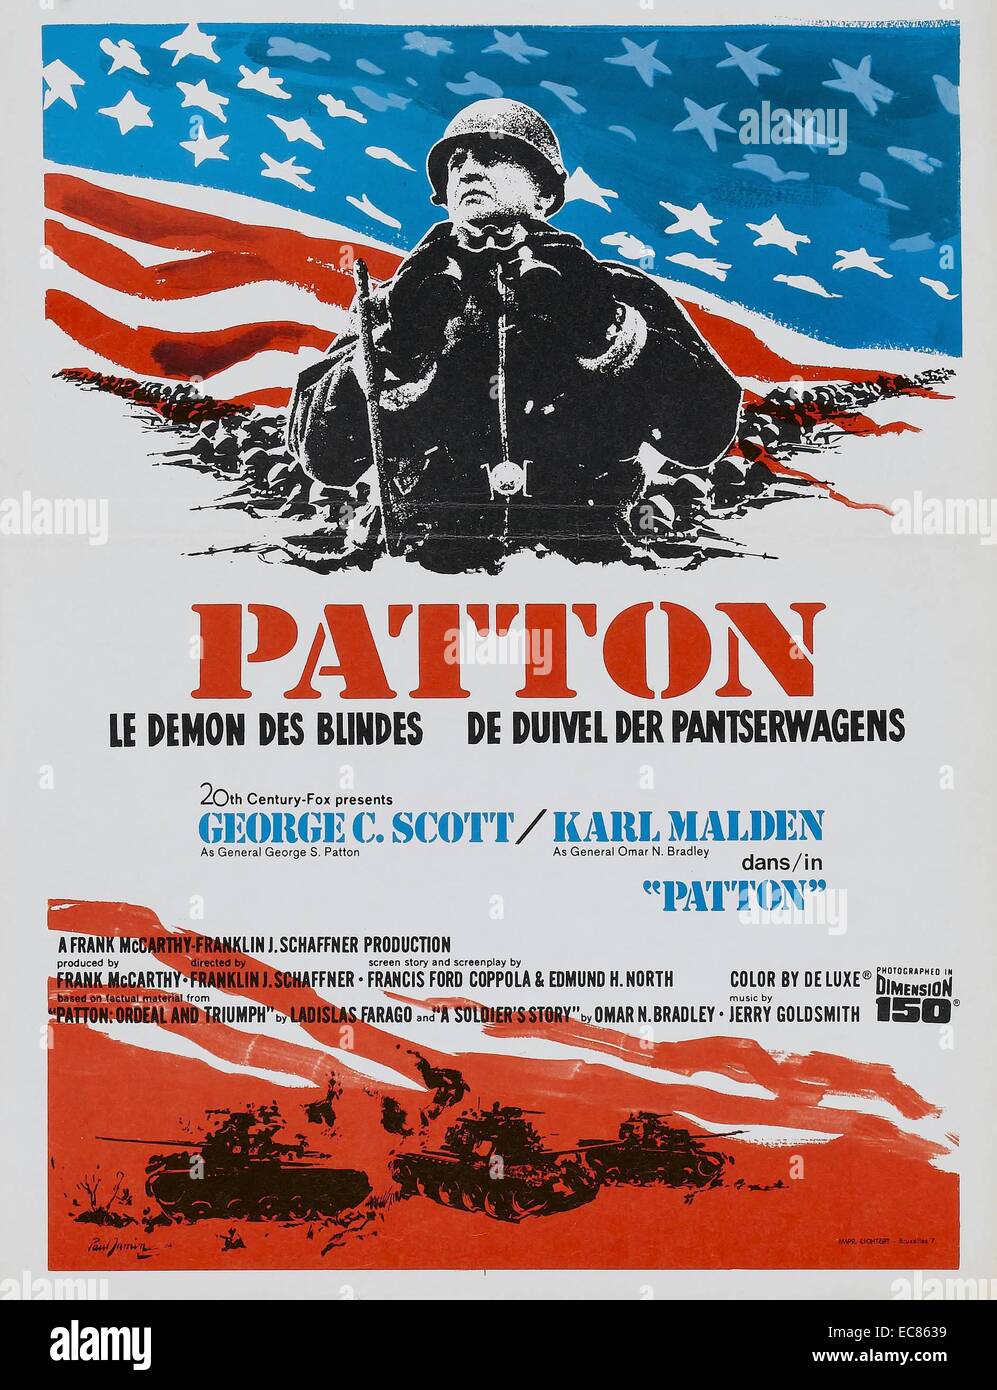 Patton is a 1970 American biographical war film about U.S. General George S. Patton during World War II. It stars George C. Scott; Karl Malden; Michael Bates and Karl Michael Vogler. It was directed by Franklin J. Schaffner from a script by Francis Ford Coppola and Edmund H. North Stock Photo